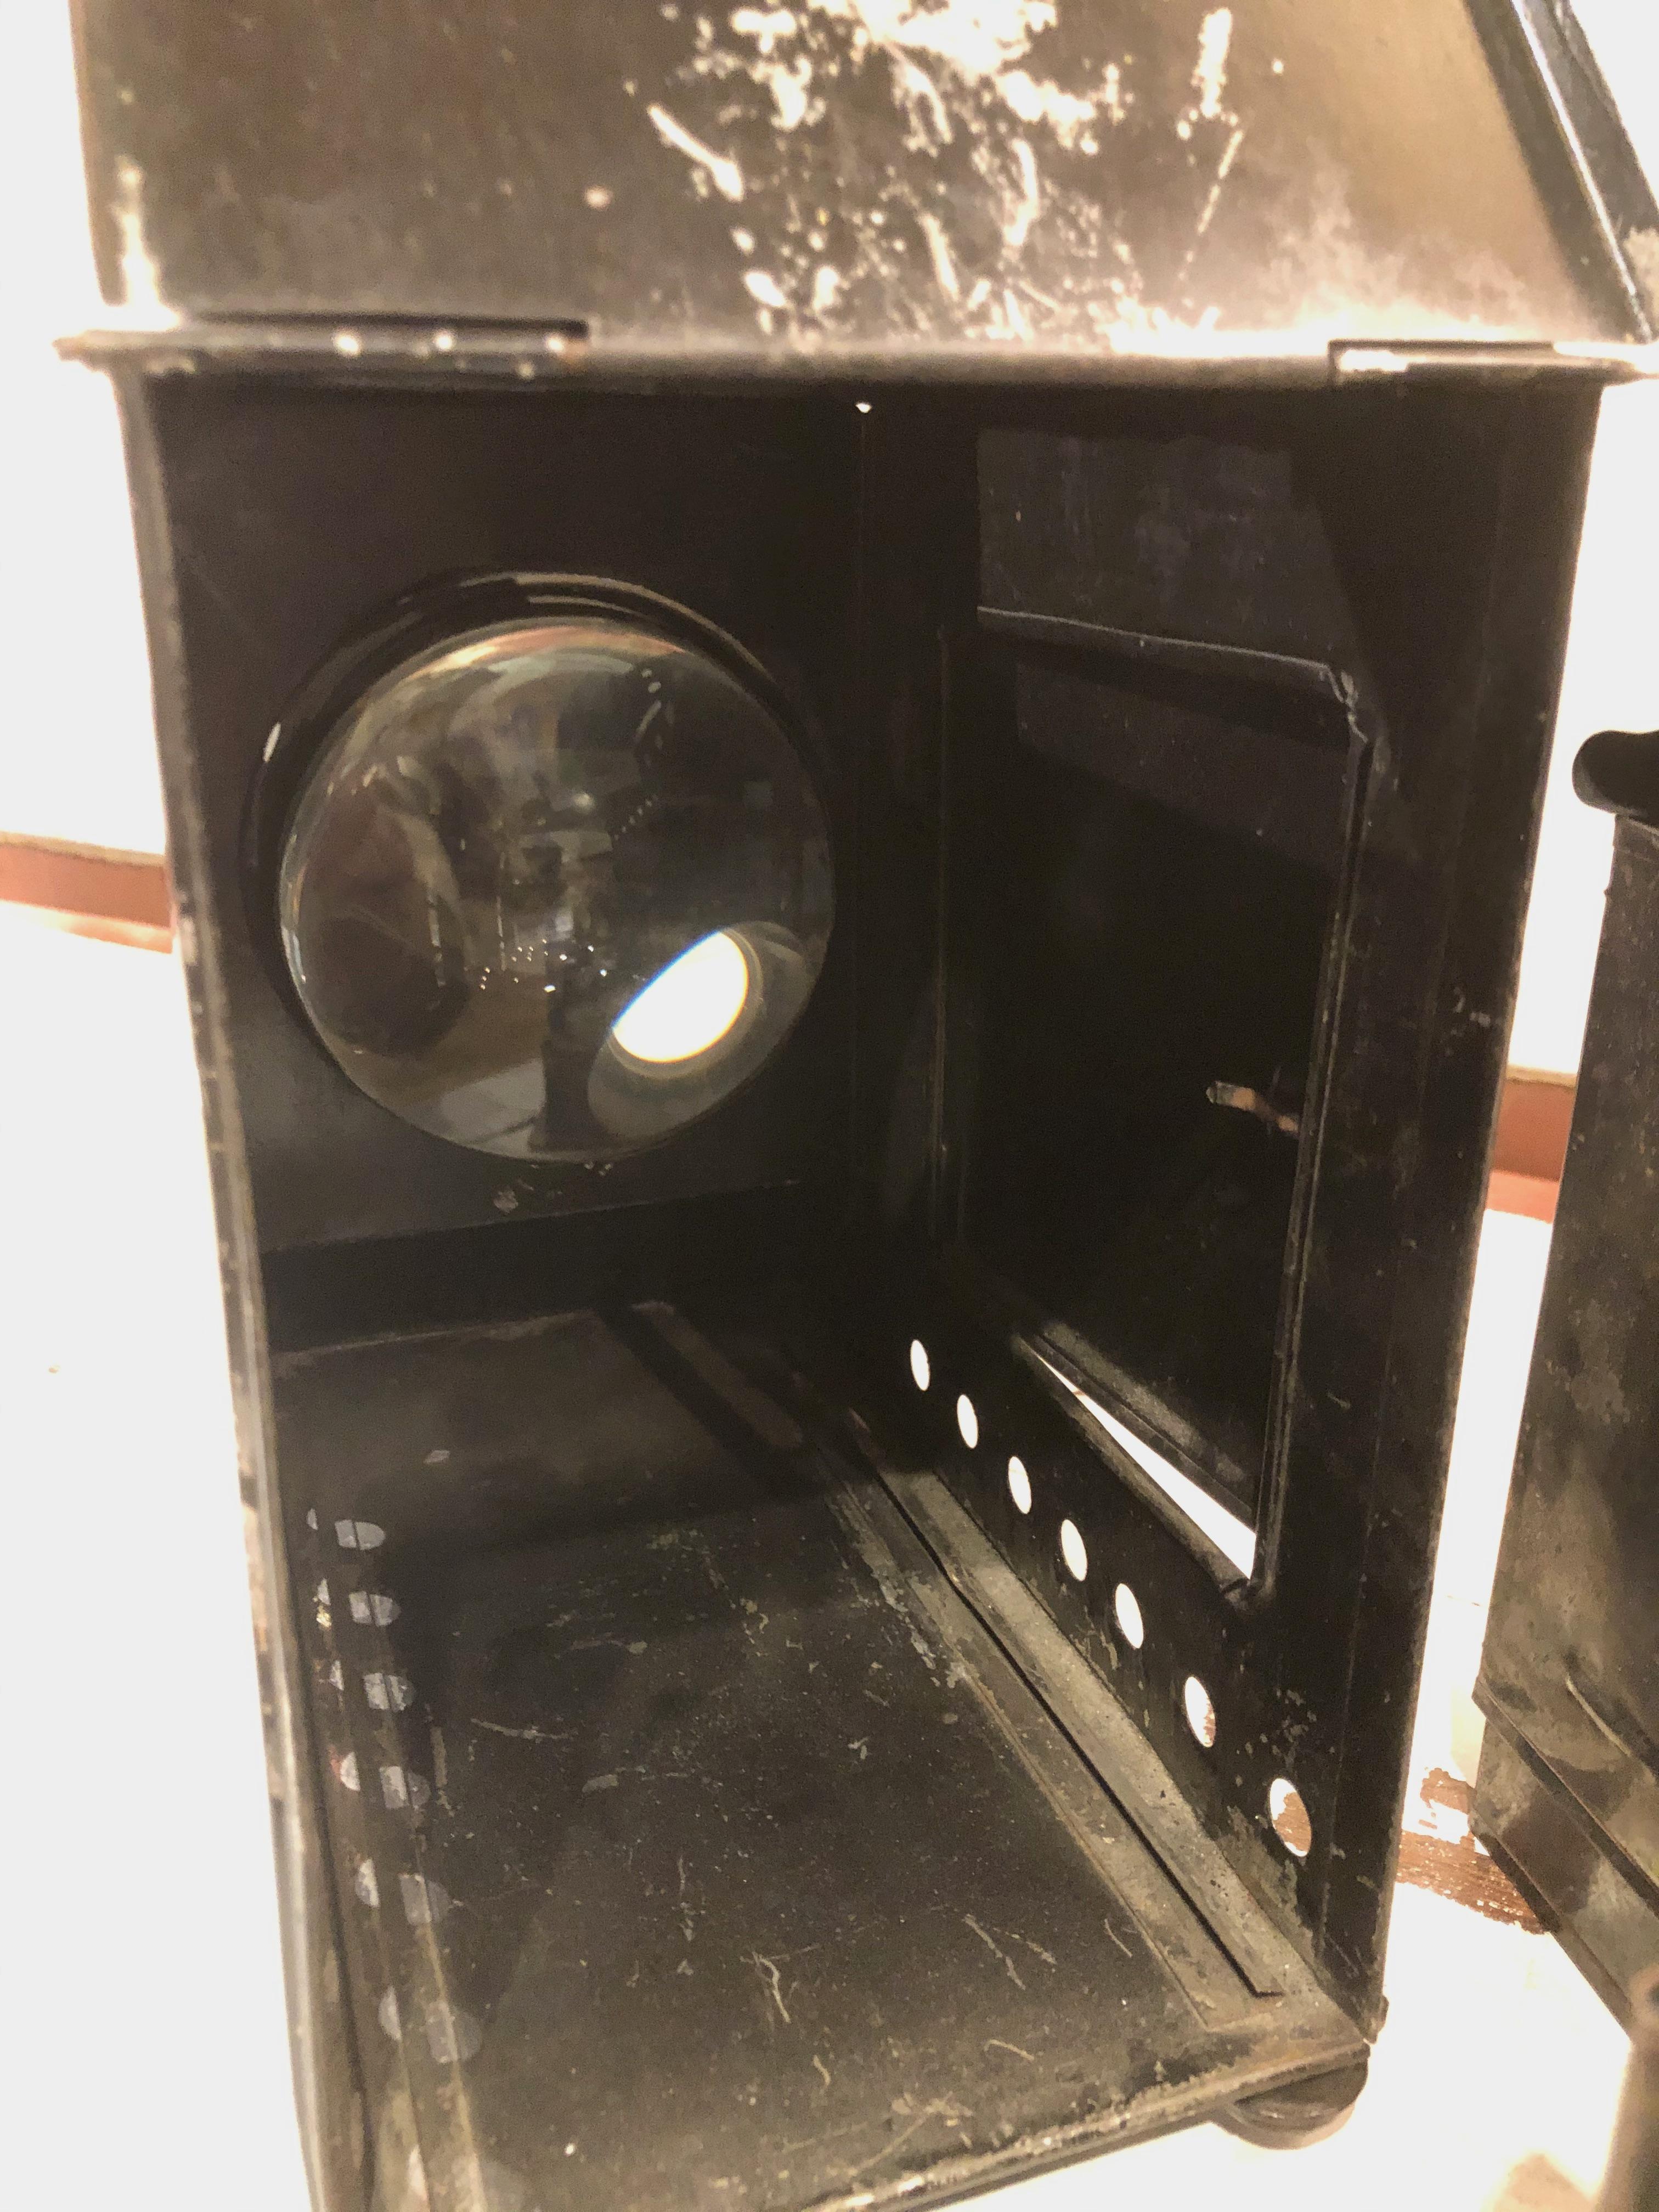 19th Century German Brass “Magic Lantern” Image Projector In Good Condition For Sale In Middleburg, VA